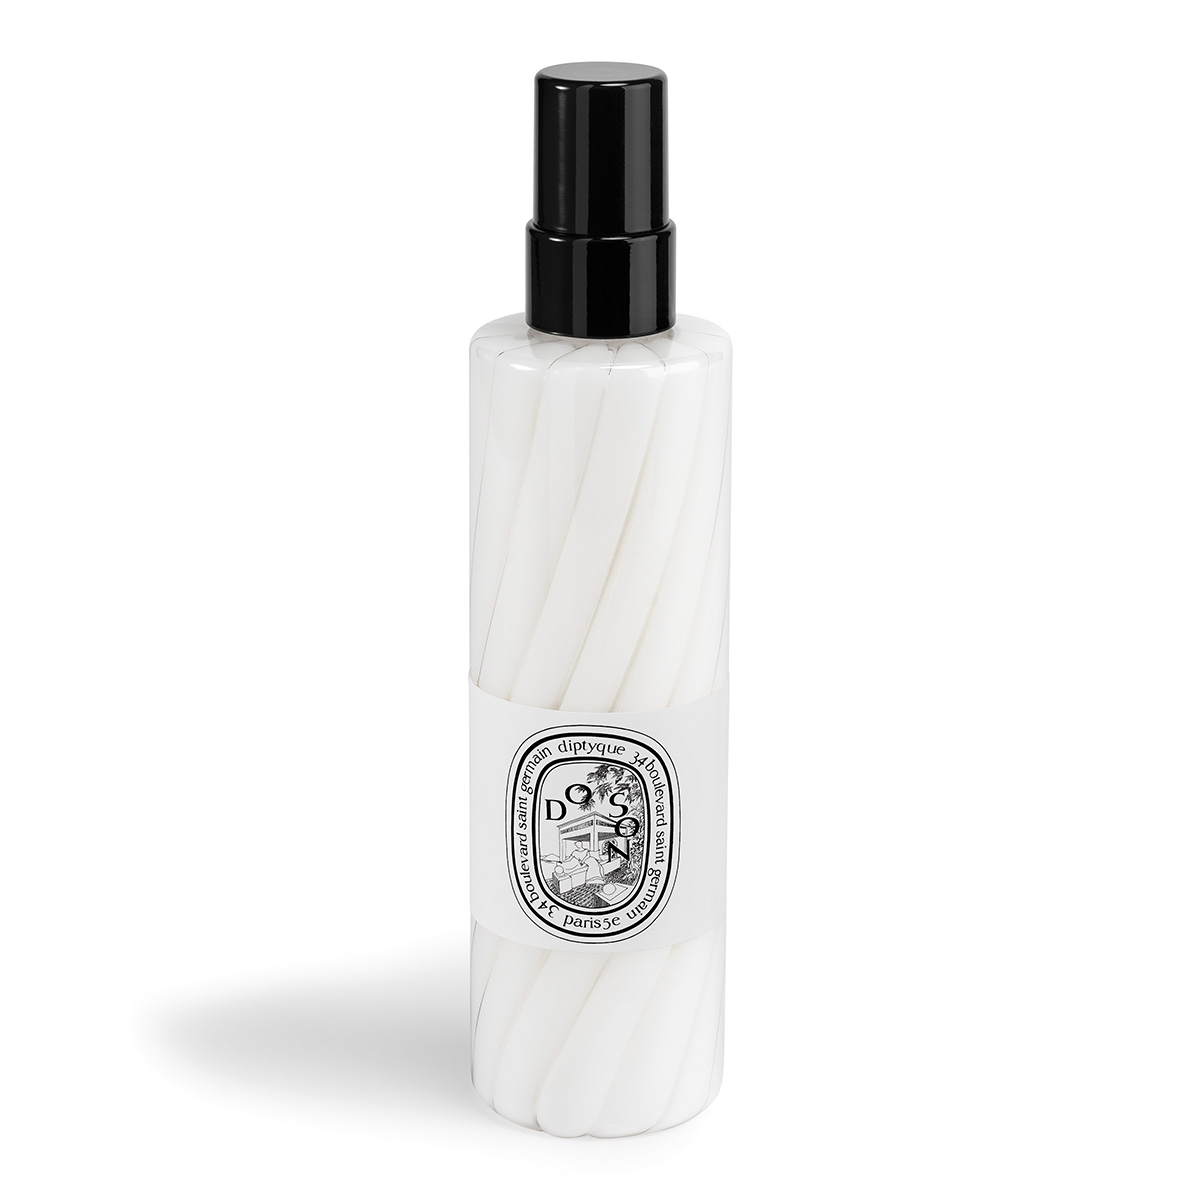 A product shot of Diptyque Do Son Body Mist